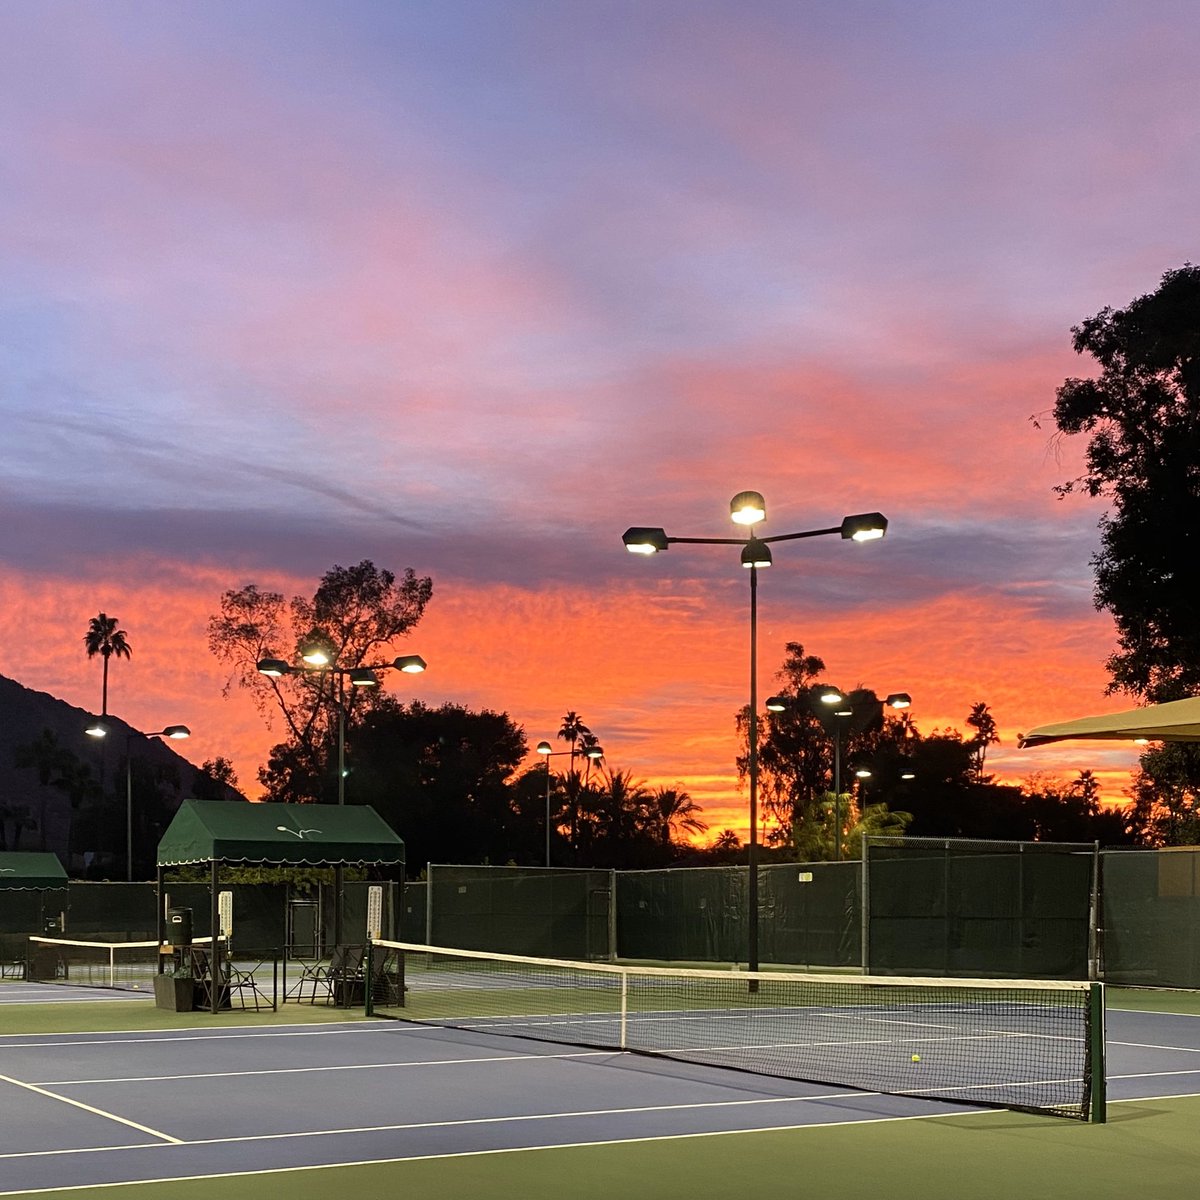 Payoff for 6am cardio tennis 🌅 #WhyILoveWhereILive #NoFilter #MyPhx